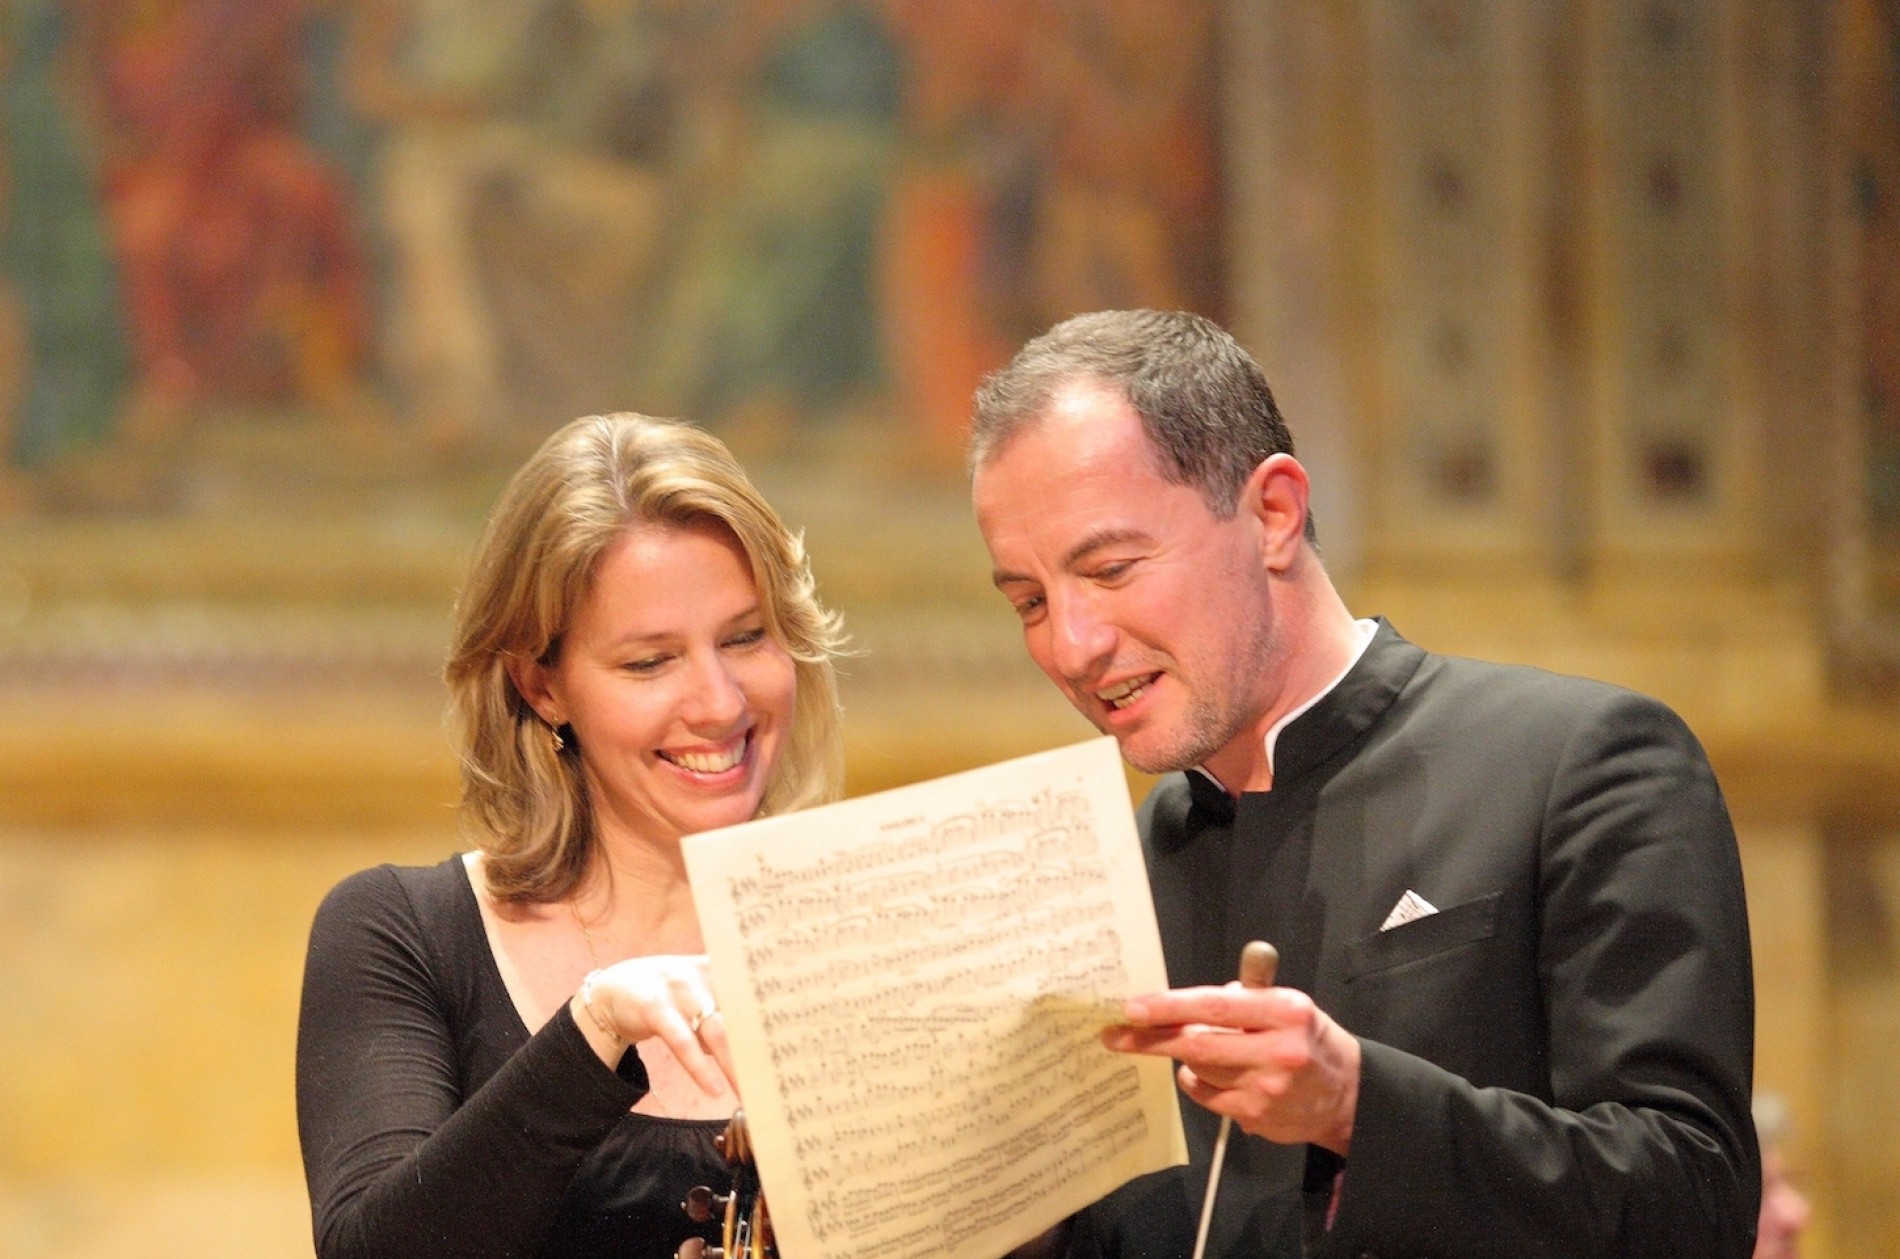 A female violinist and male conductor smile as they look over a page of music